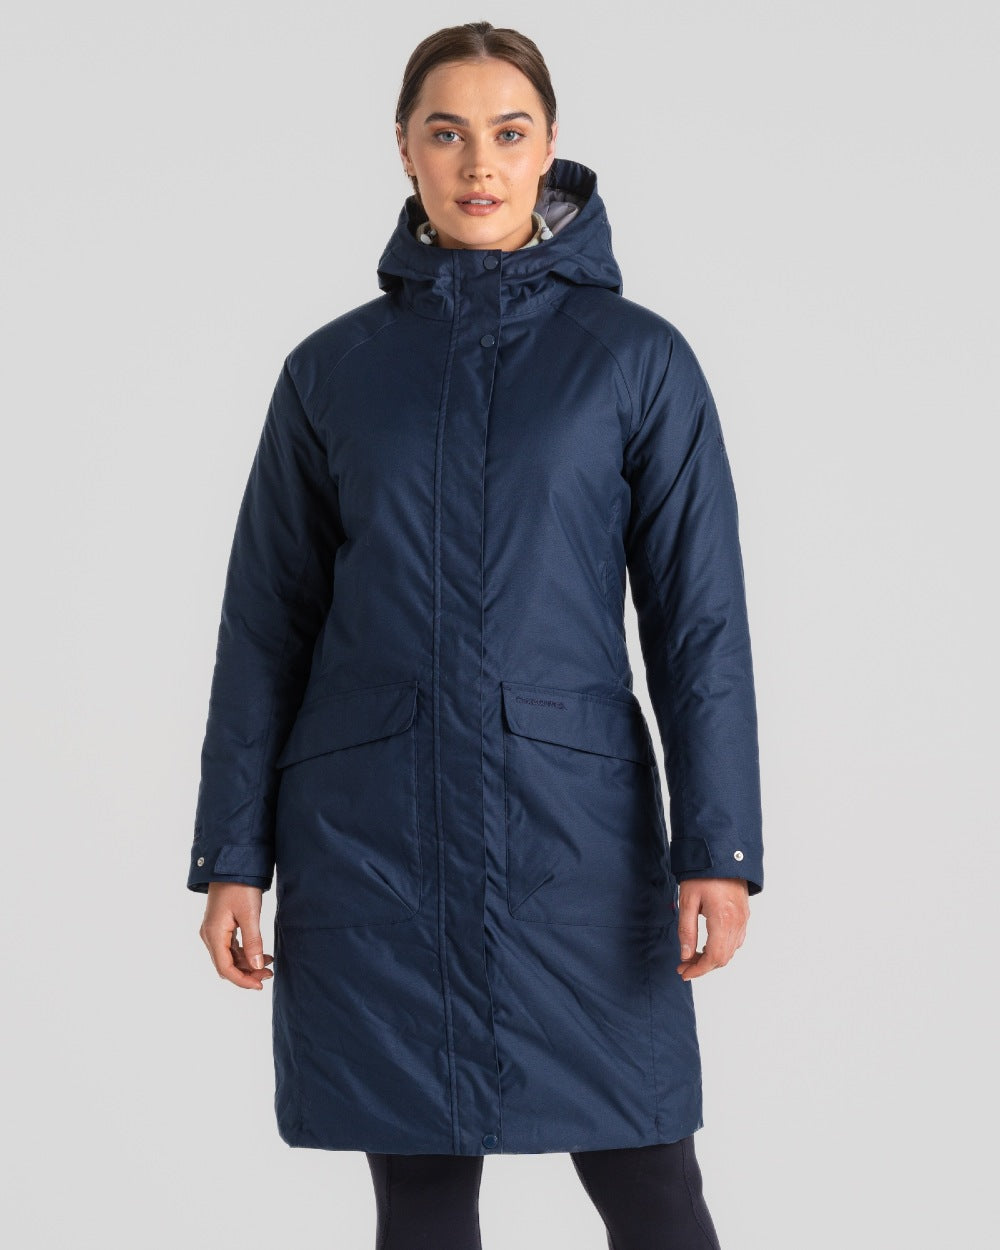 Craghoppers Caithness Long Waterproof Jacket in Blue Navy 